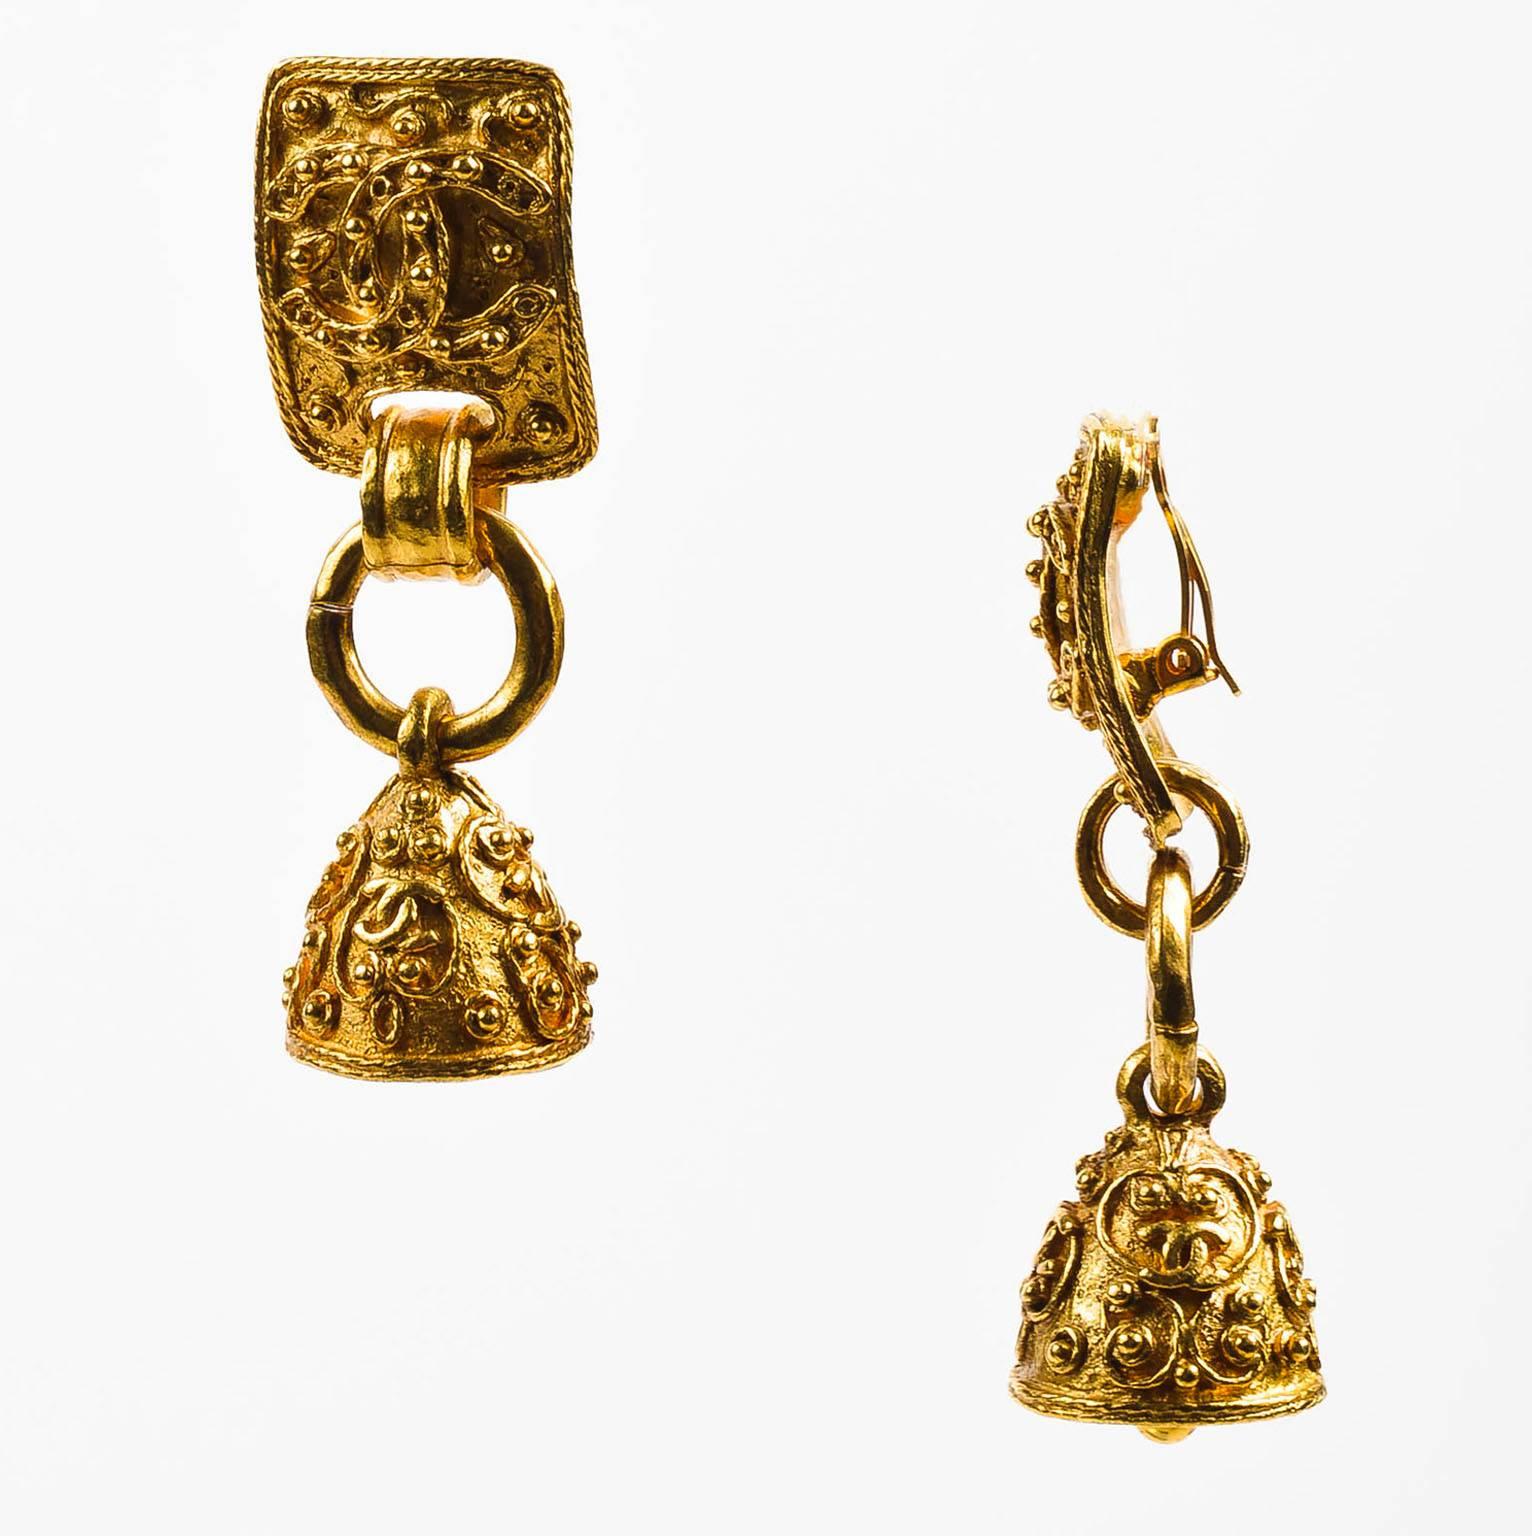 These vintage Chanel earrings combine ornate design & whimsical character; design from the 1994 Fall Collection. Gold tone metal with beaded texture and iconic 'CC' logos. Rectangular base holds a graceful, ringing bell. Clip on backs.